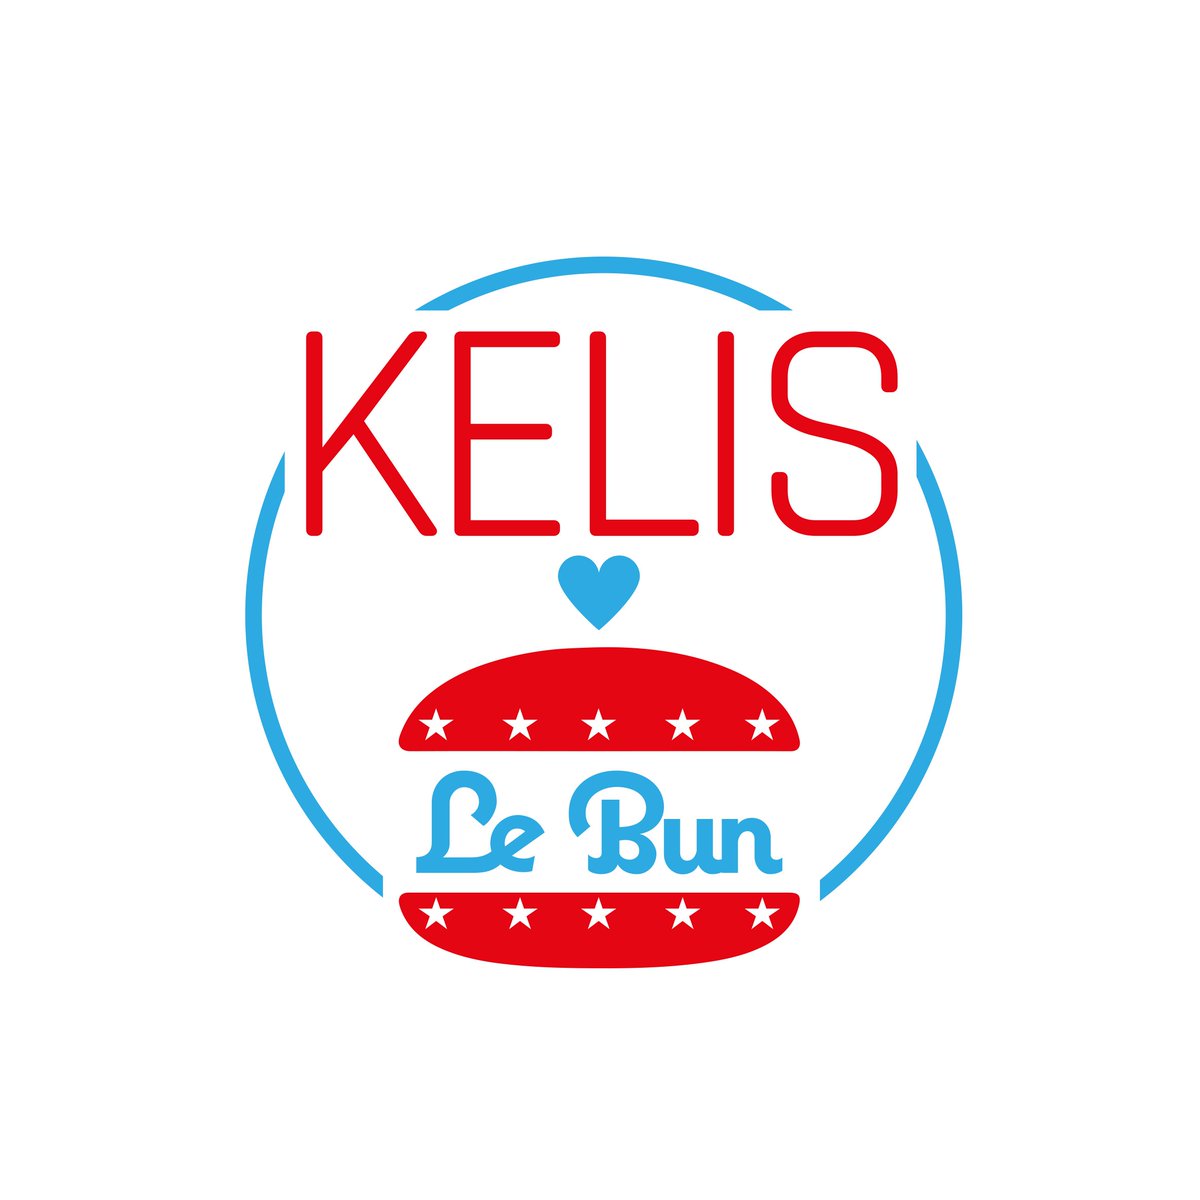 RT @StandonCalling: We're excited to announce @iamkelis & @LeBunUK have teamed up to bring her menu to Standon! https://t.co/JEZJWRuFYF htt…